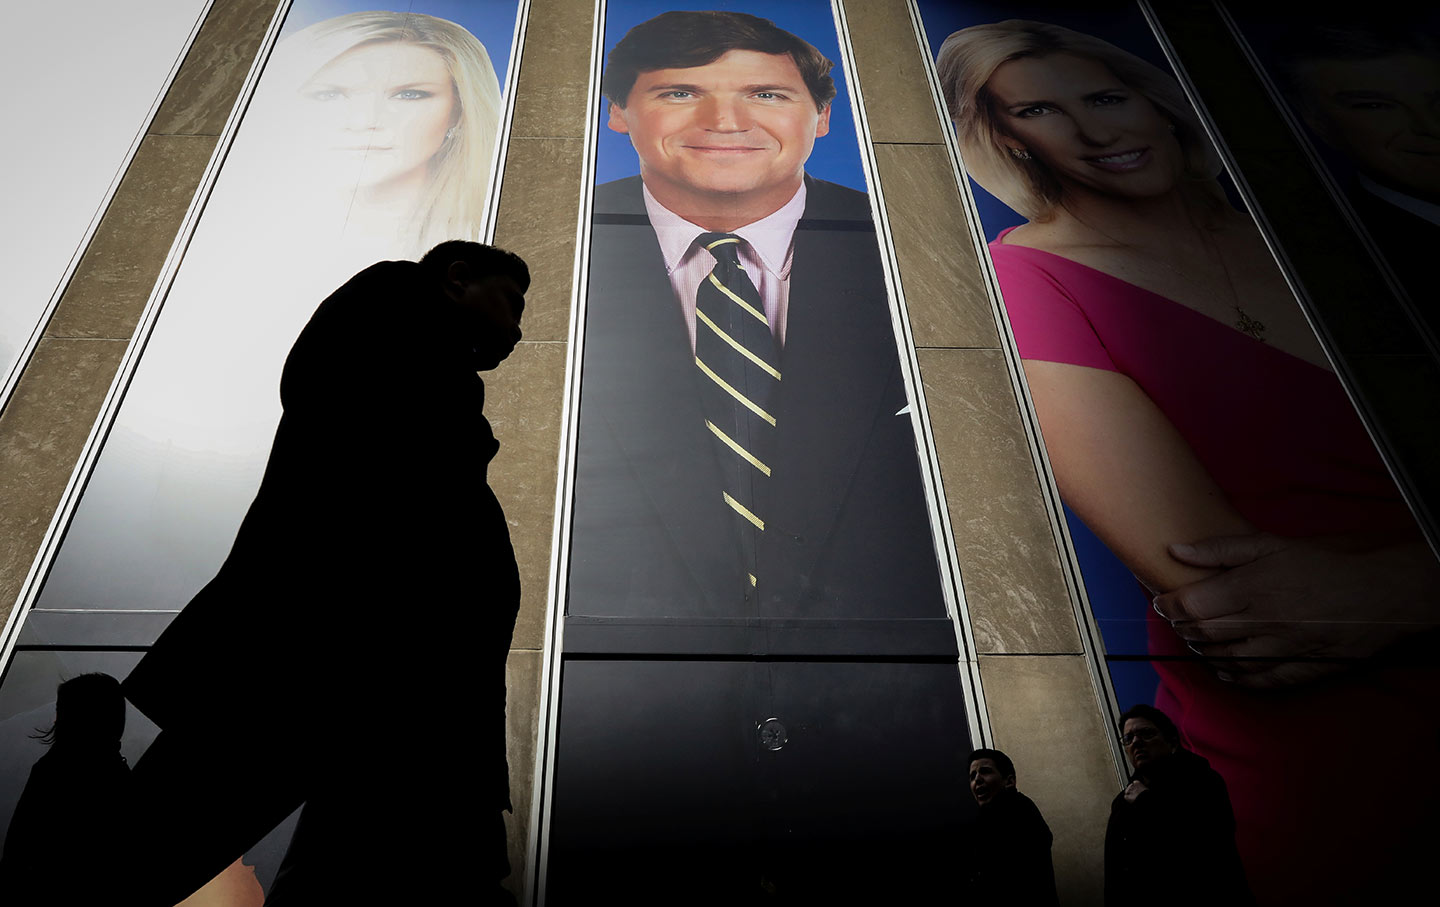 a promo for Fox News hosts including Tucker Carlson on the News Corporation building in New York